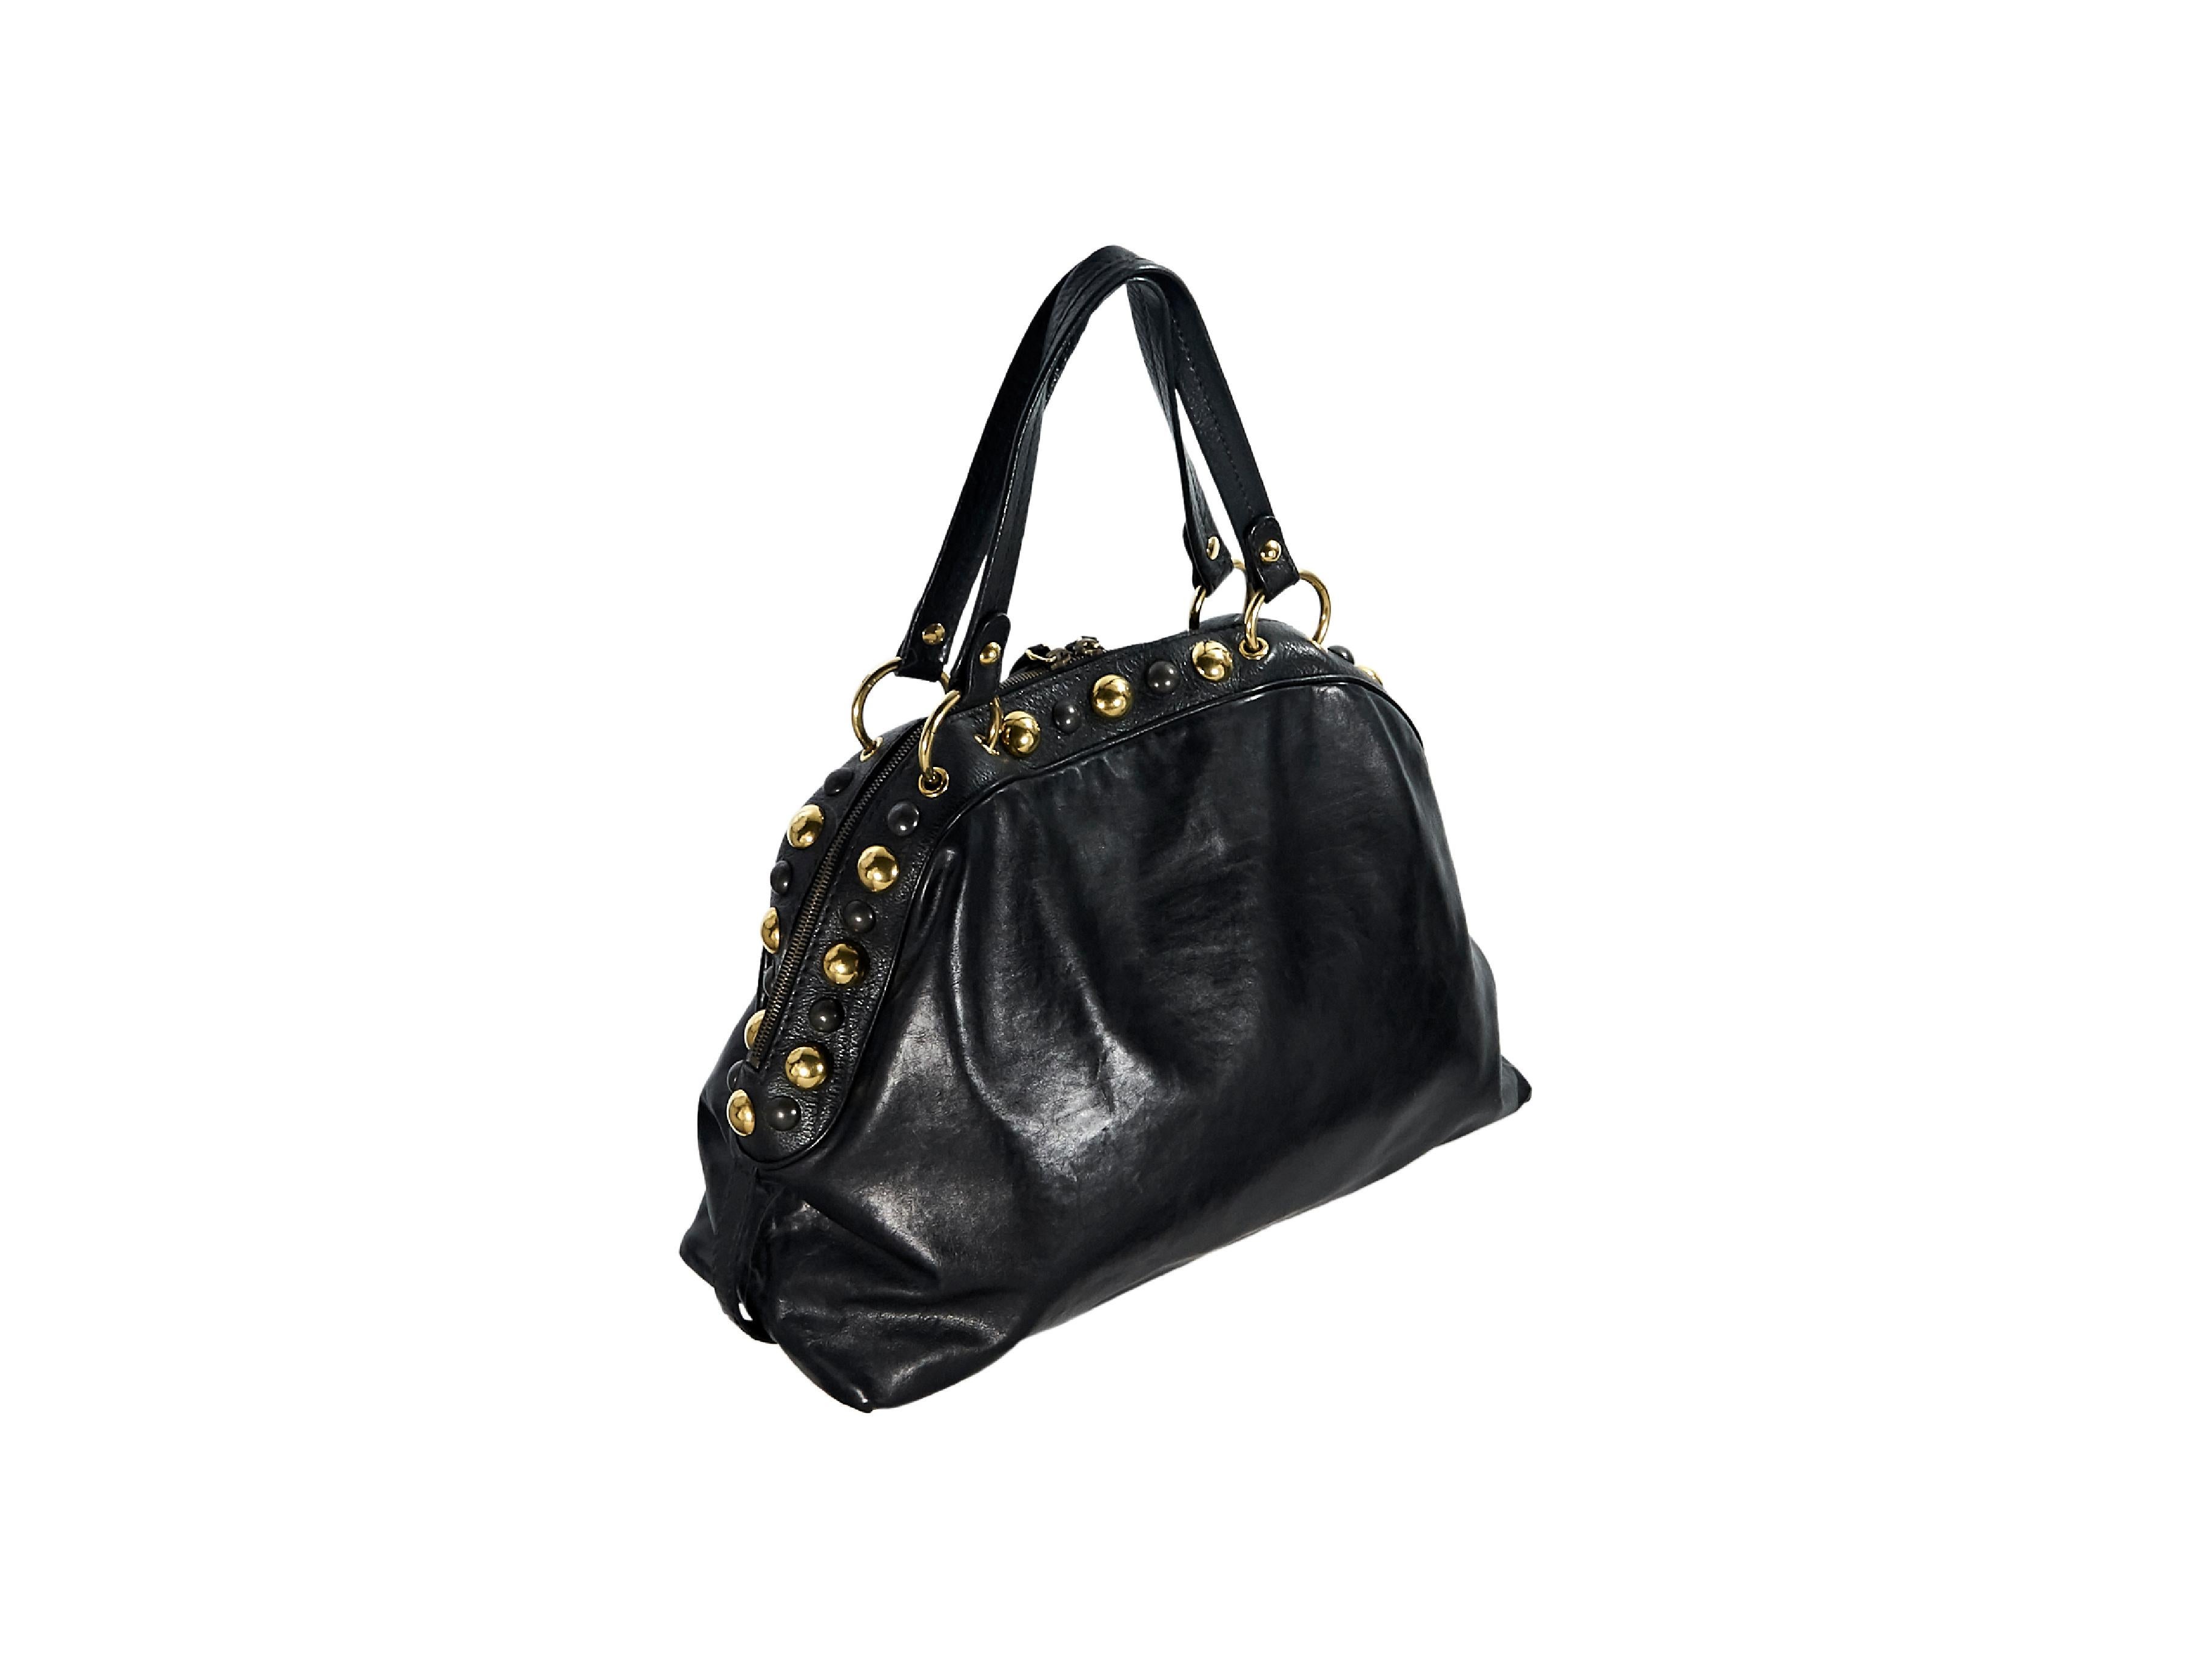 Product details:  Vintage black studded leather Babouska tote bag by Gucci.  Dual shoulder straps.  Top zip closure.  Lined interior with inner zip and slide pockets.  Protective metal feet.  Goldtone hardware.  18